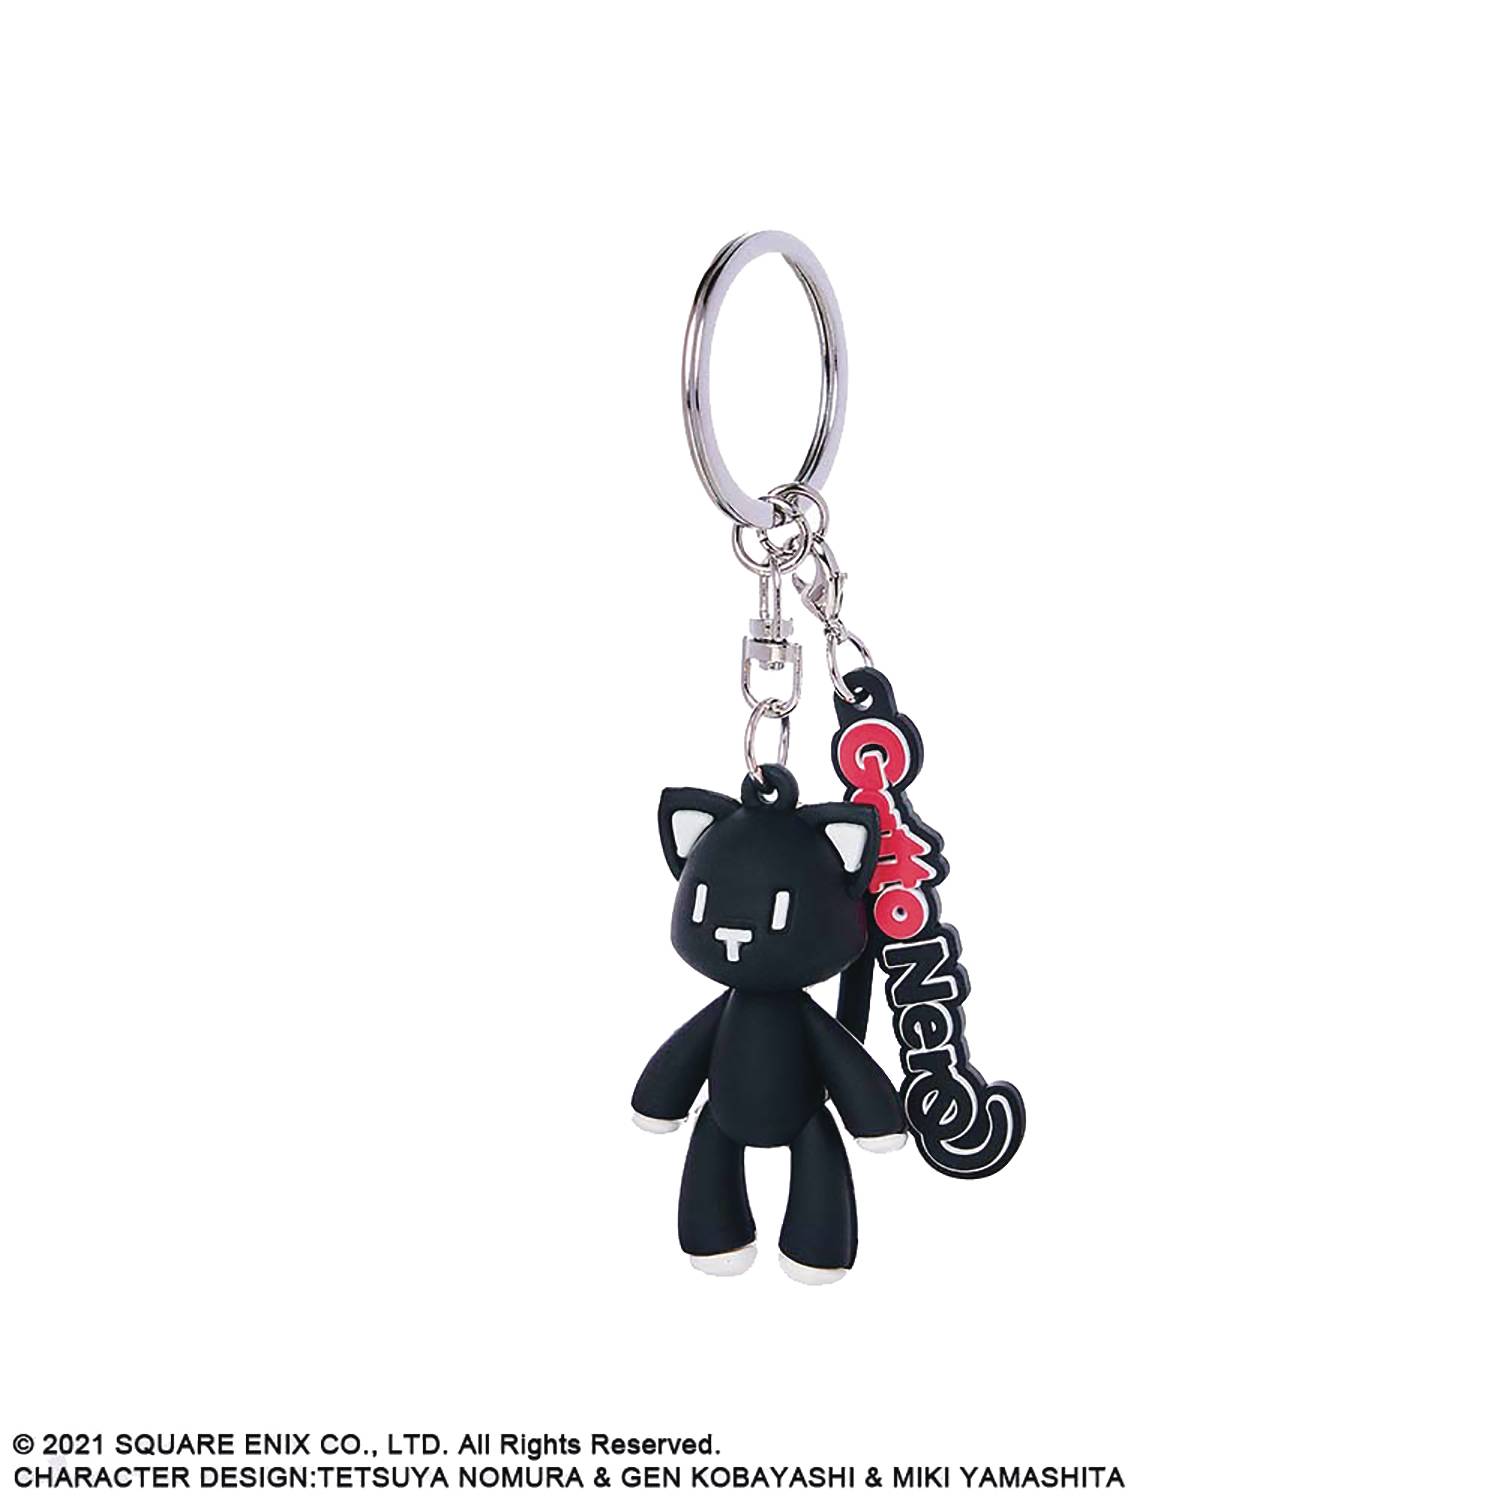 NEO WORLD ENDS WITH YOU MR MEW RUBBER MASCOT KEYCHAIN